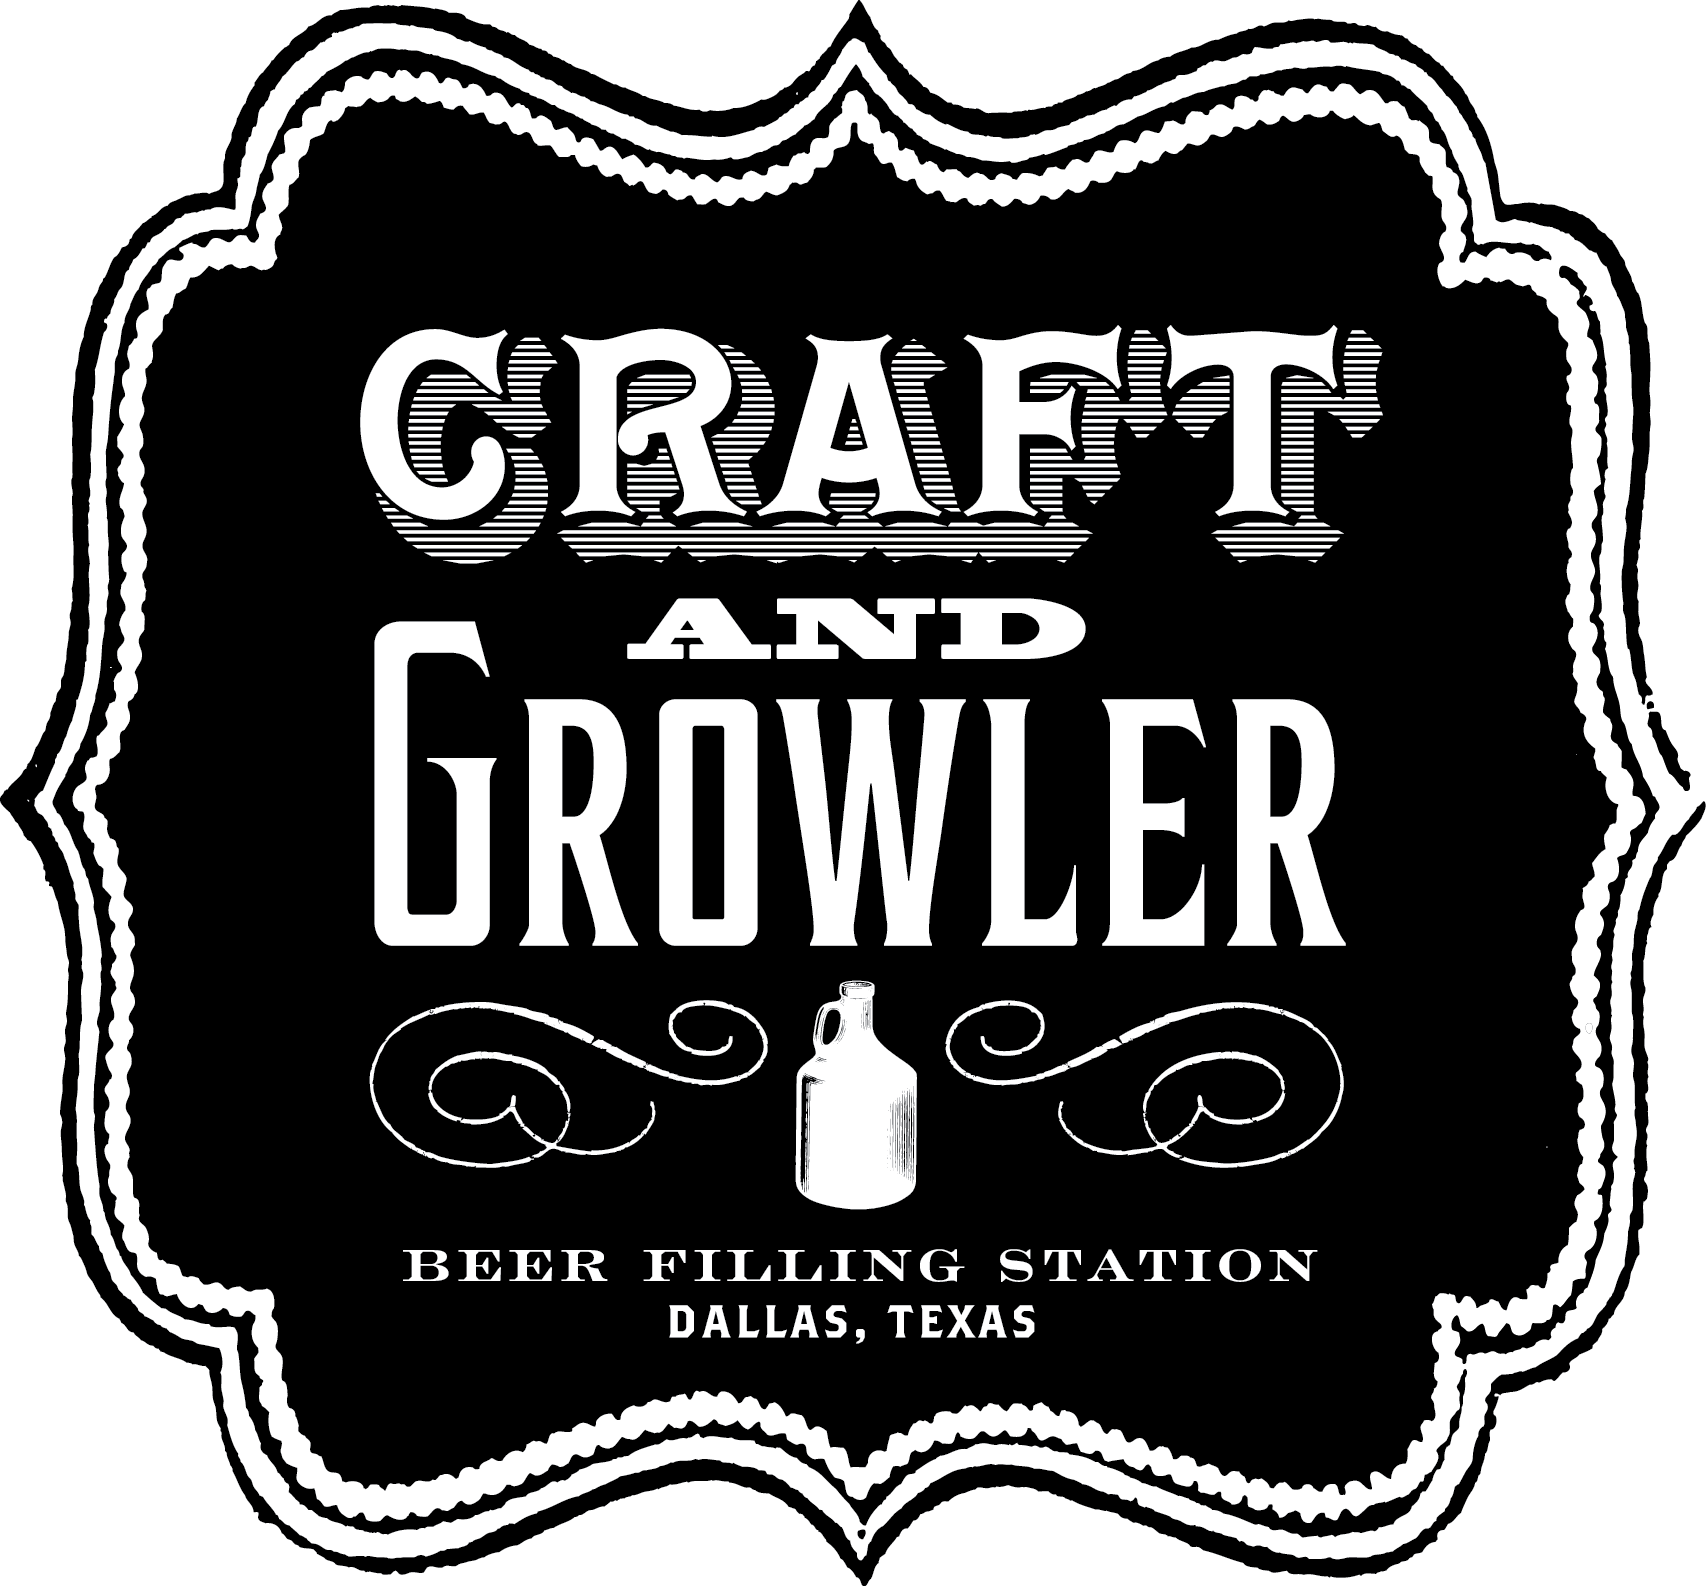 Craft and Growler, Broadway Dallas partner